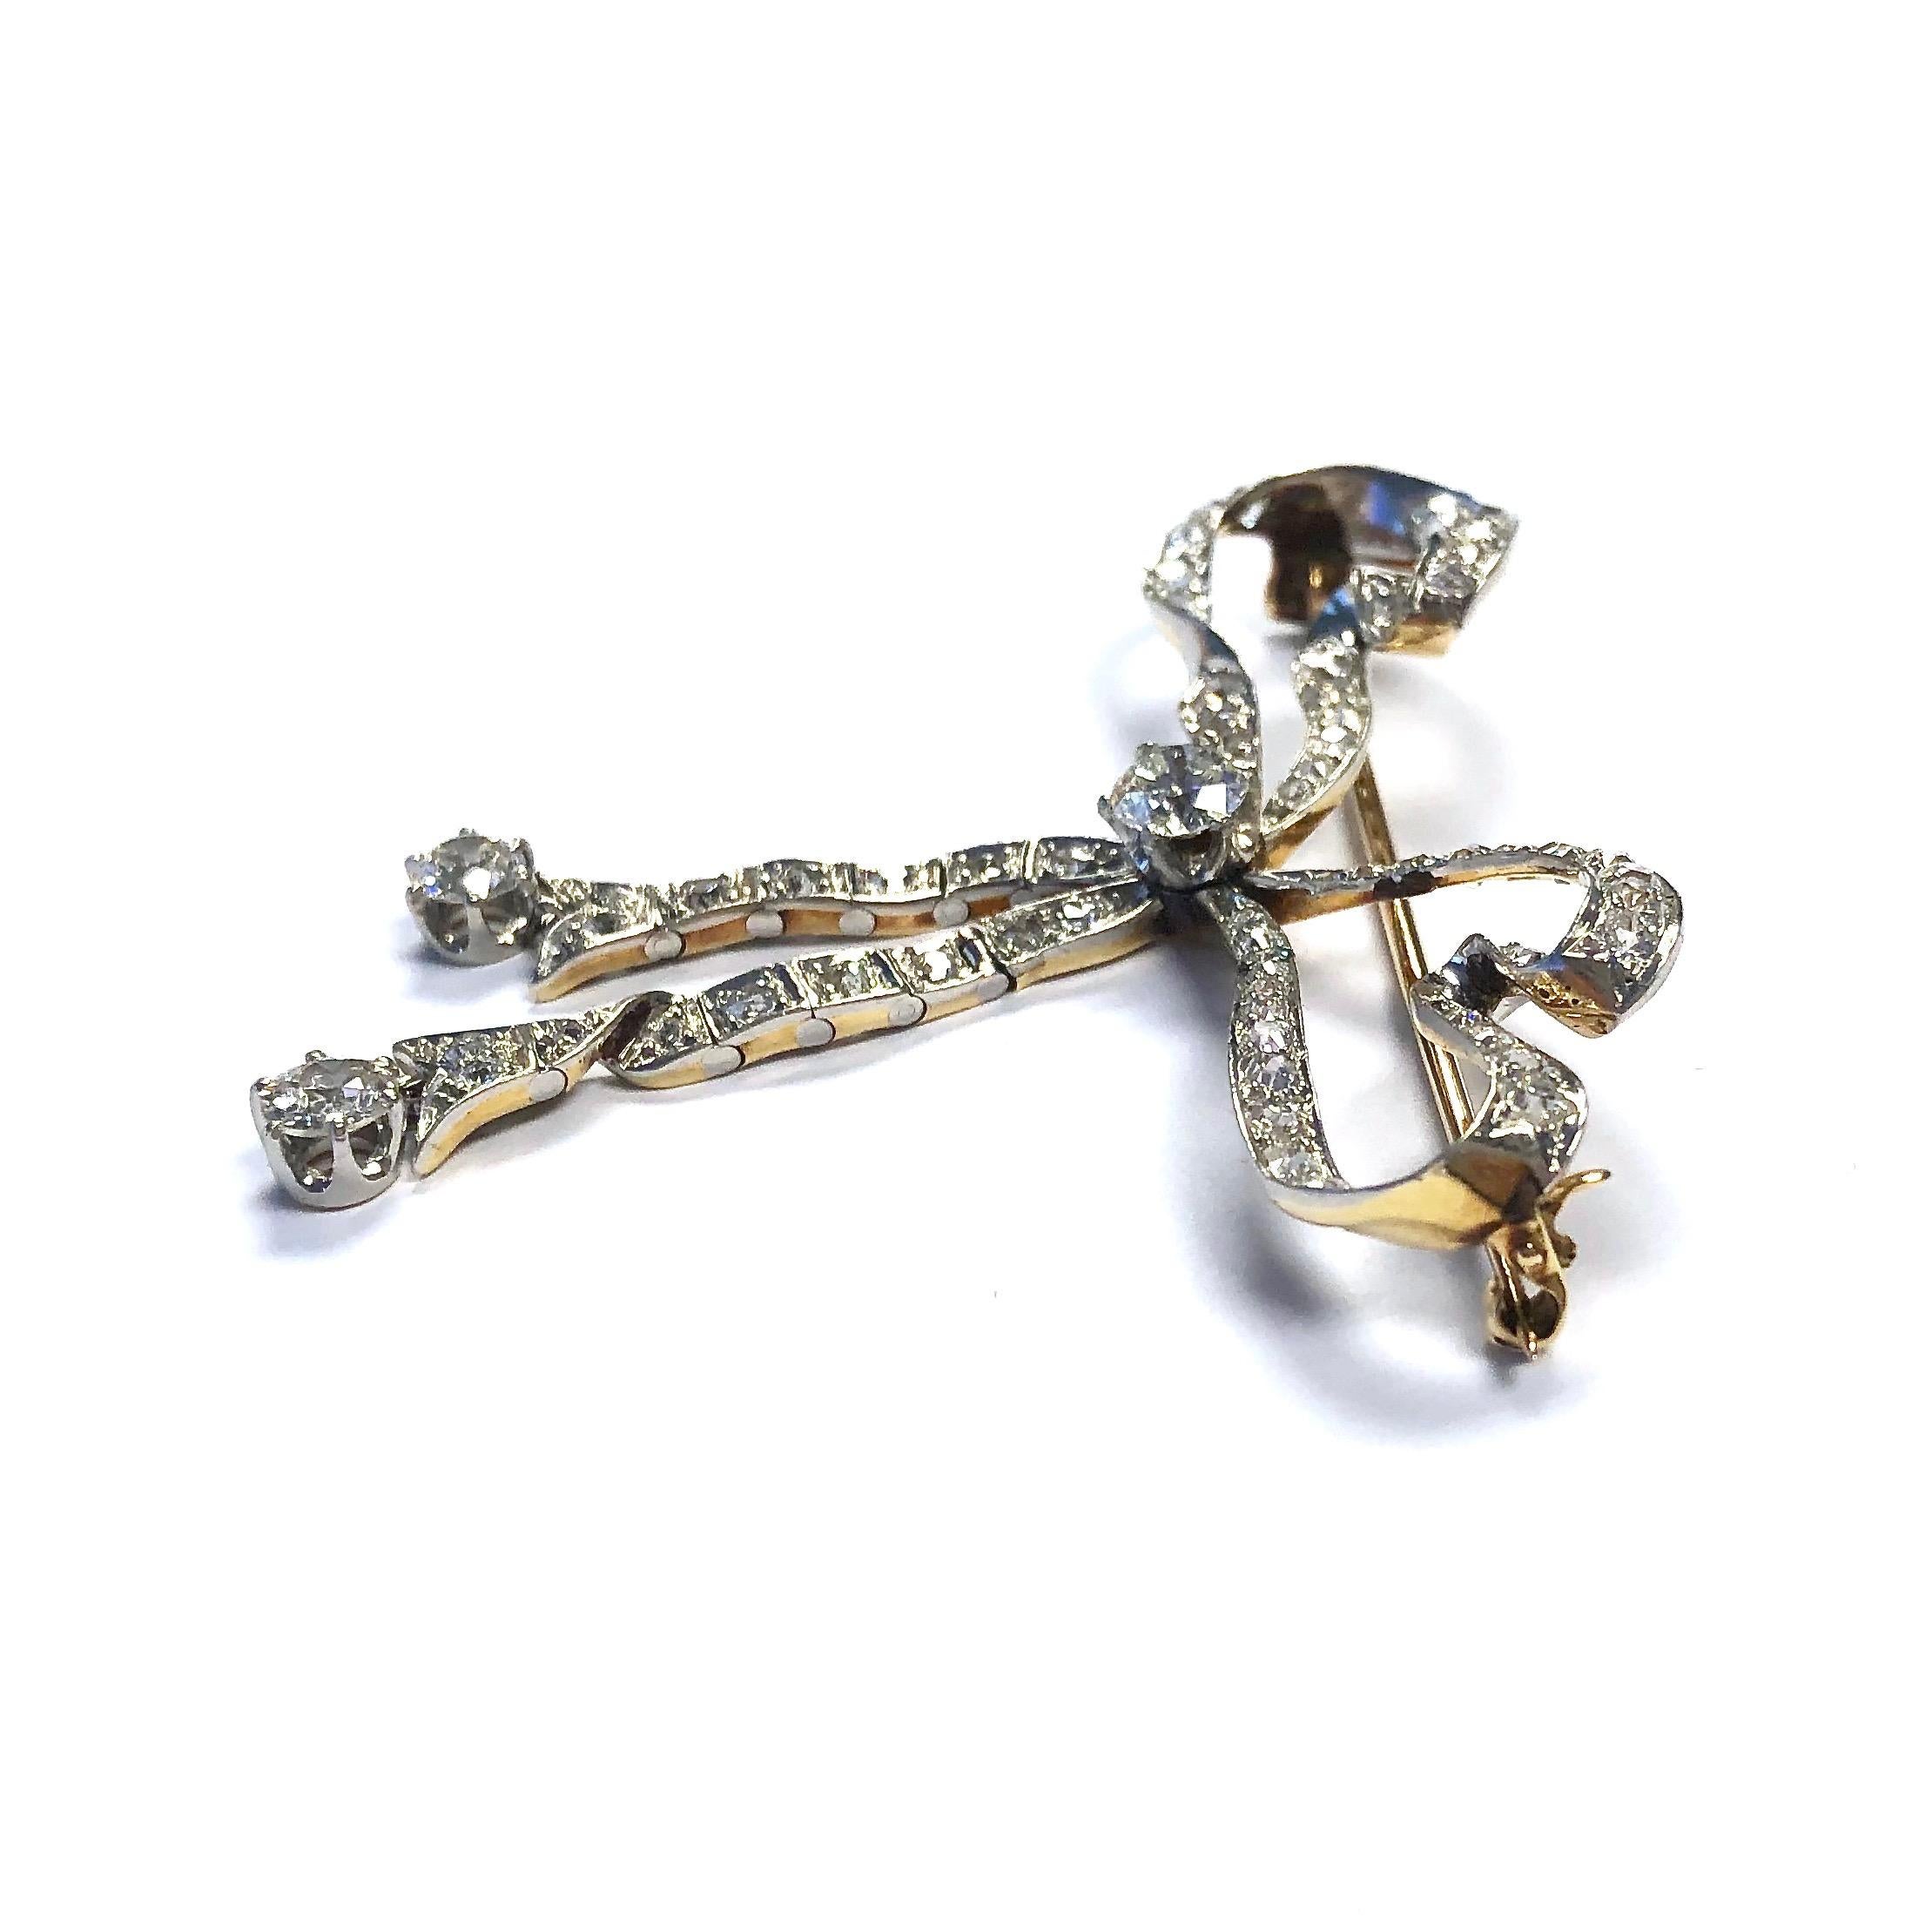 Victorian era large bow pin with four carats of diamonds set in platinum topped 18K yellow gold. 
Diamonds: 4ctw VS-SI/G-H
Measurements: 2 1/8